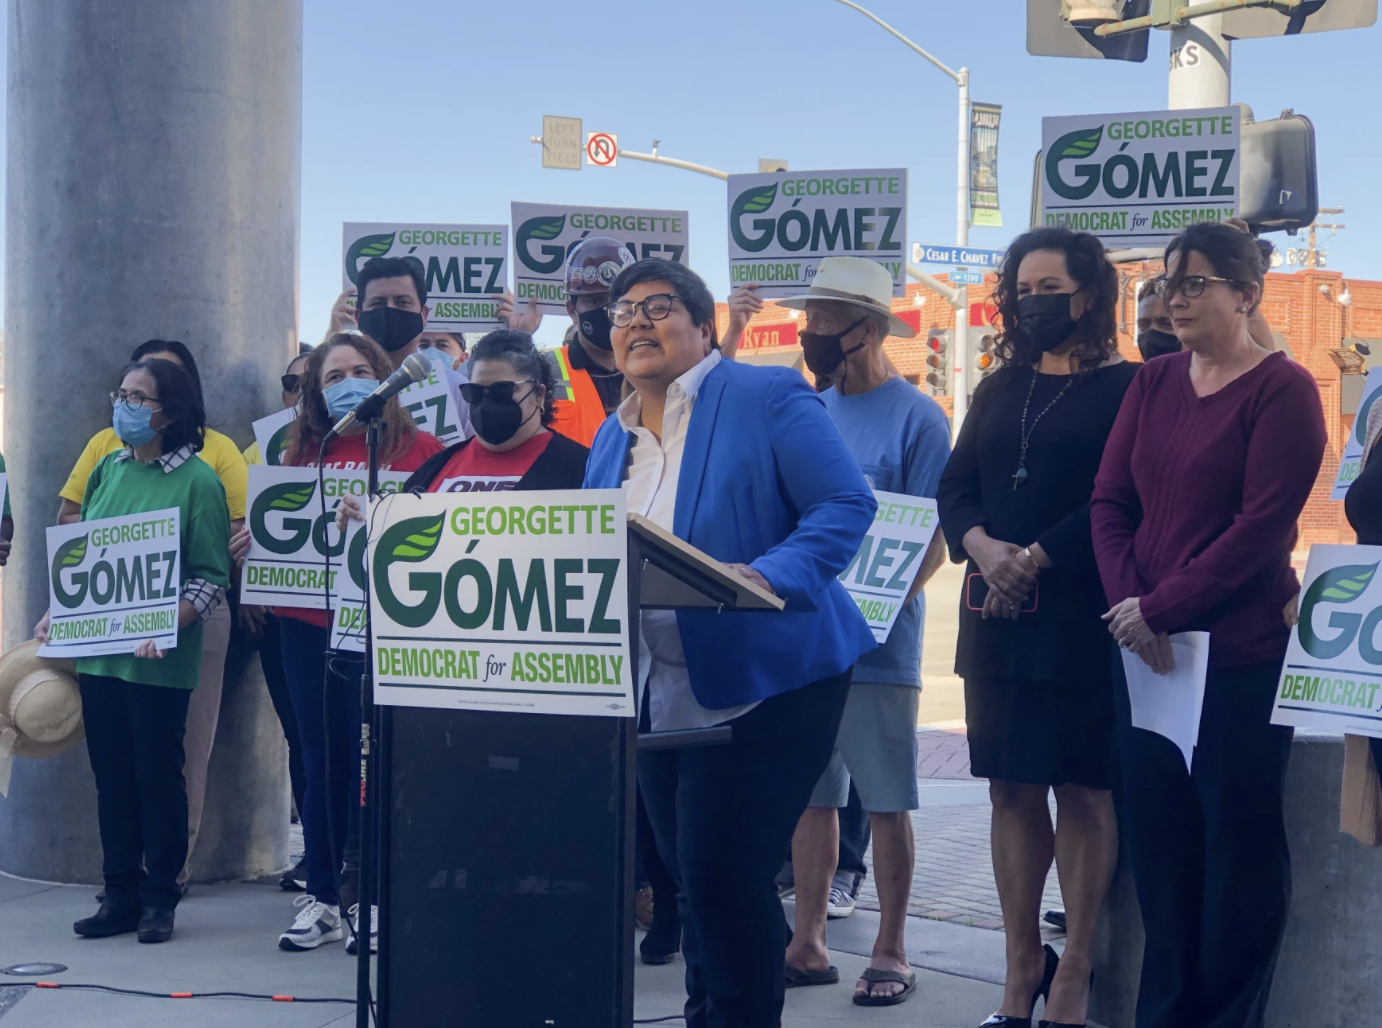 Former Assemblymember Lorena Gonzalez endorses Georgette Gómez for District 80 seat, other contenders fighting for role